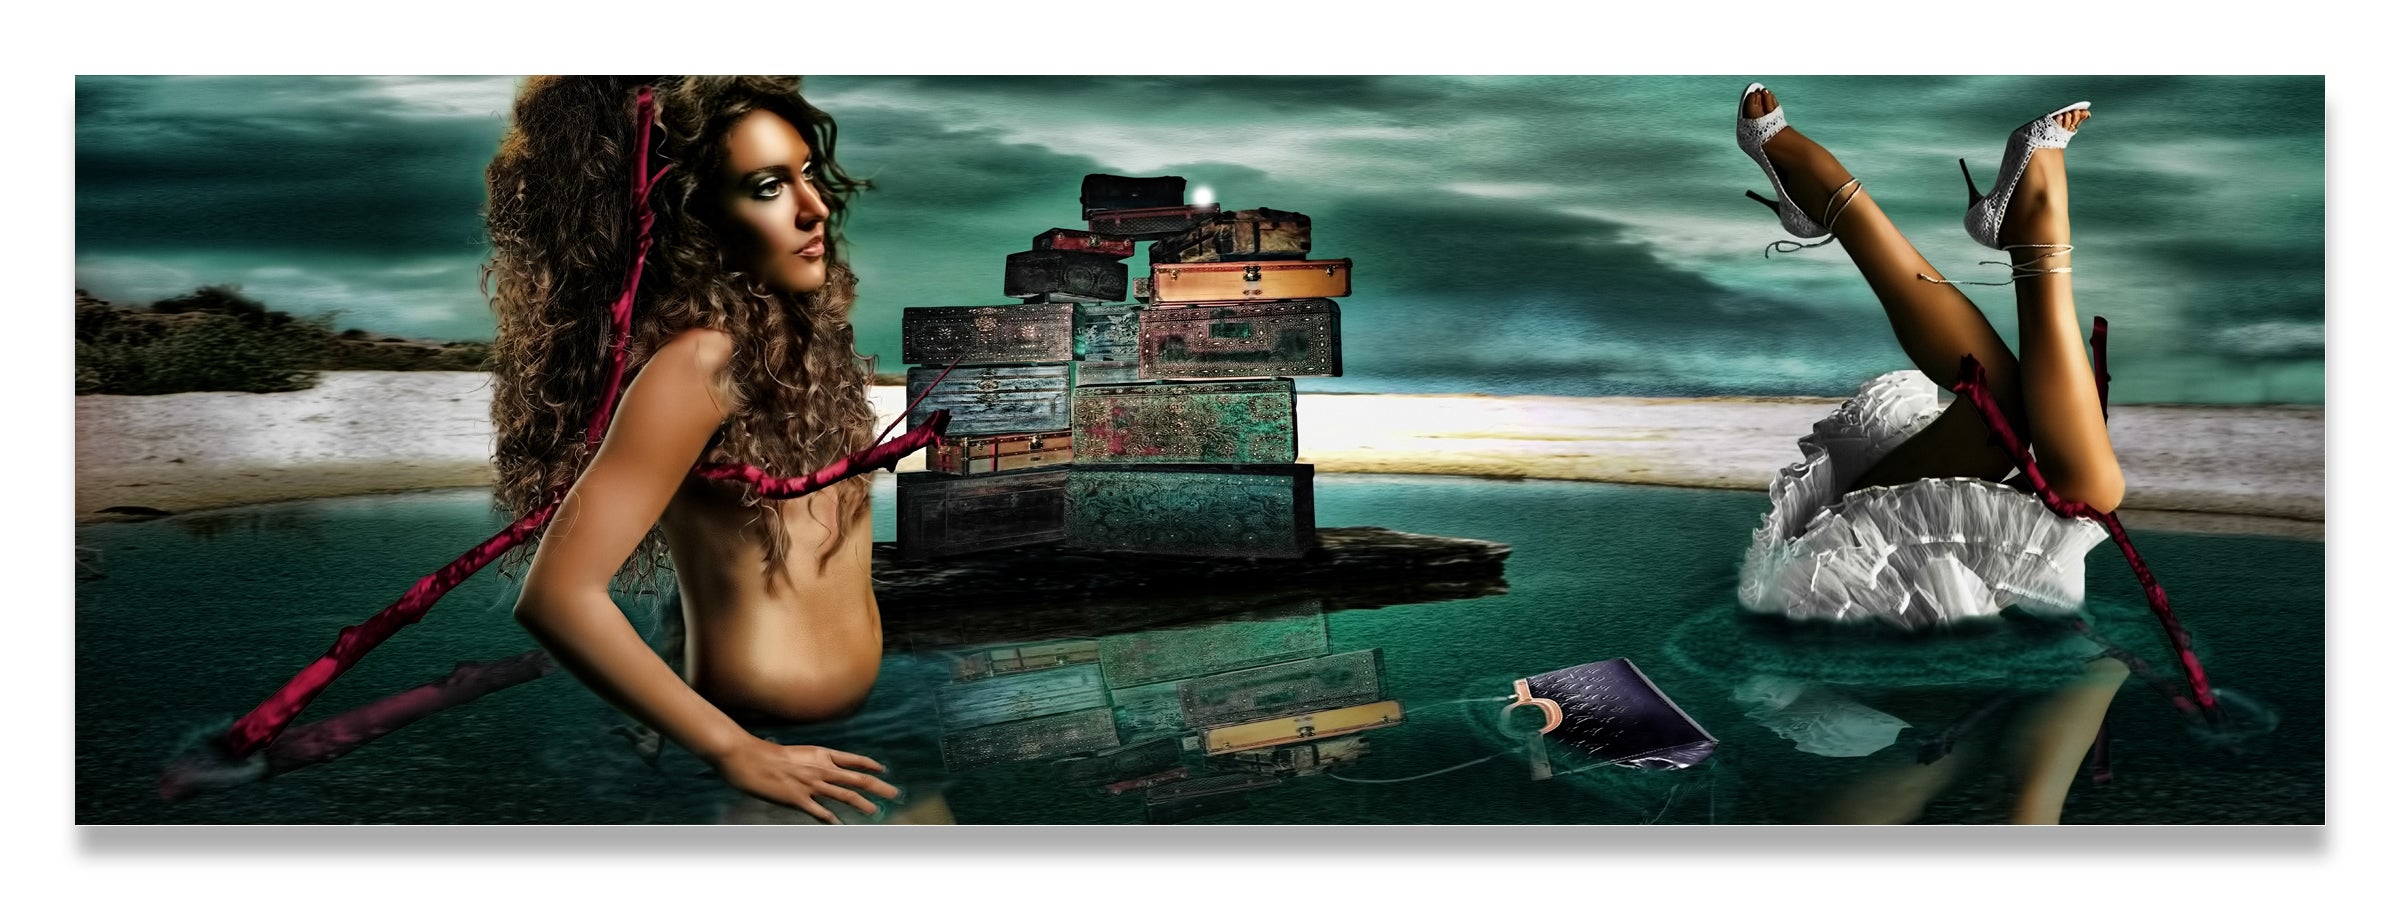 Louii Vuitton vs Salvador Dali- Disjointed Woman Floating in Water with Red Crutches and Surreal Clouds-Fine Art Print